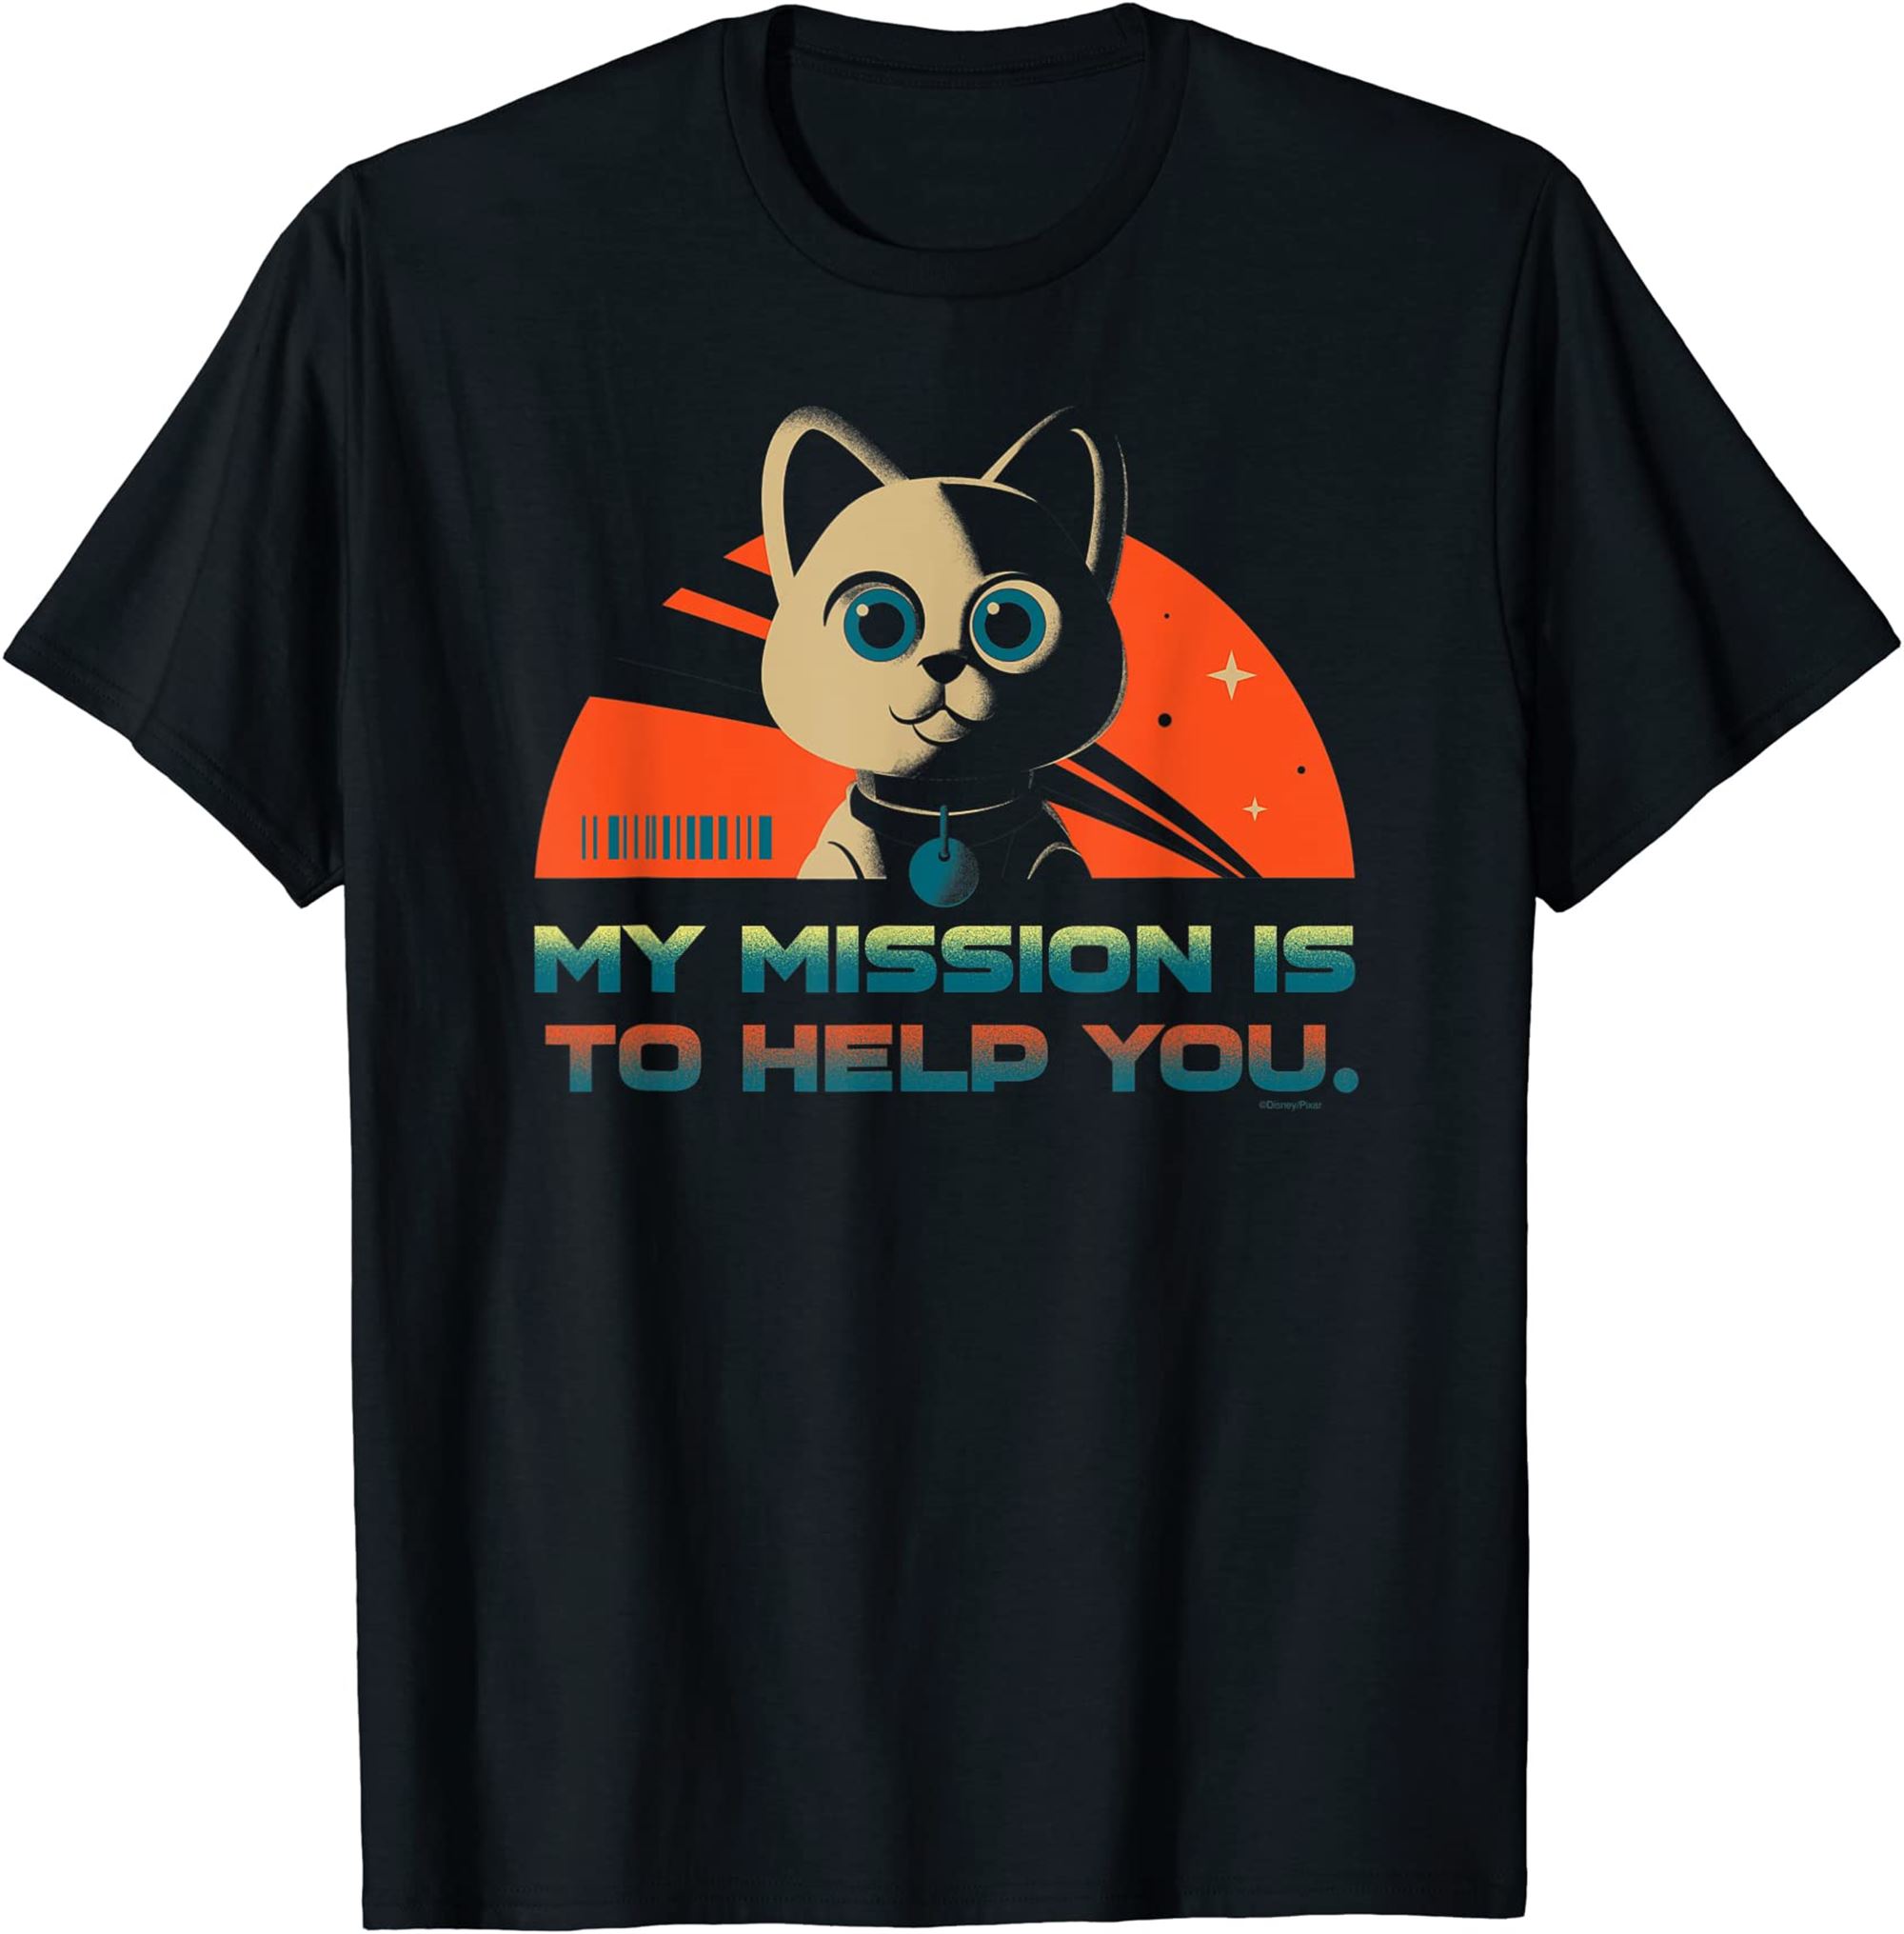 Disney Pixar Lightyear Sox My Mission Is To Help You T-shirt Size Up To 5xl